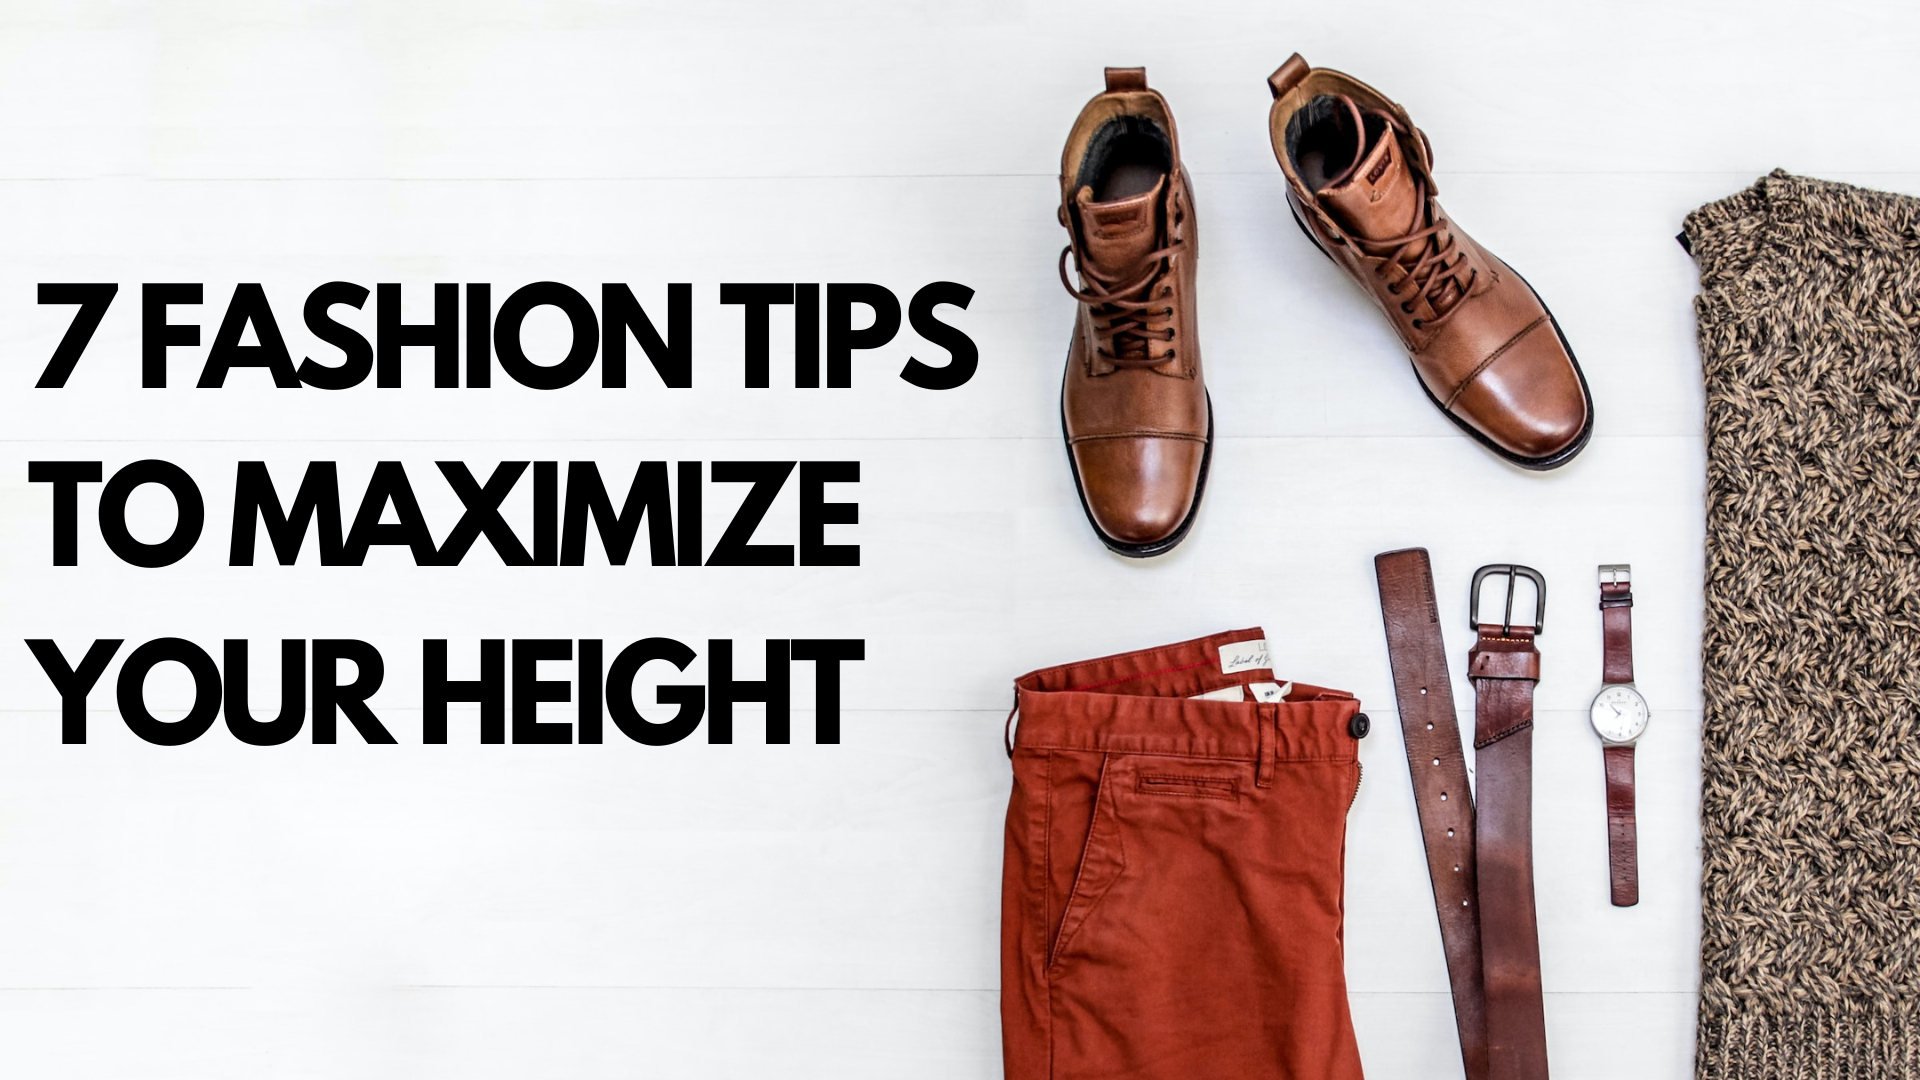 7 Tips for Maximizing Your Height